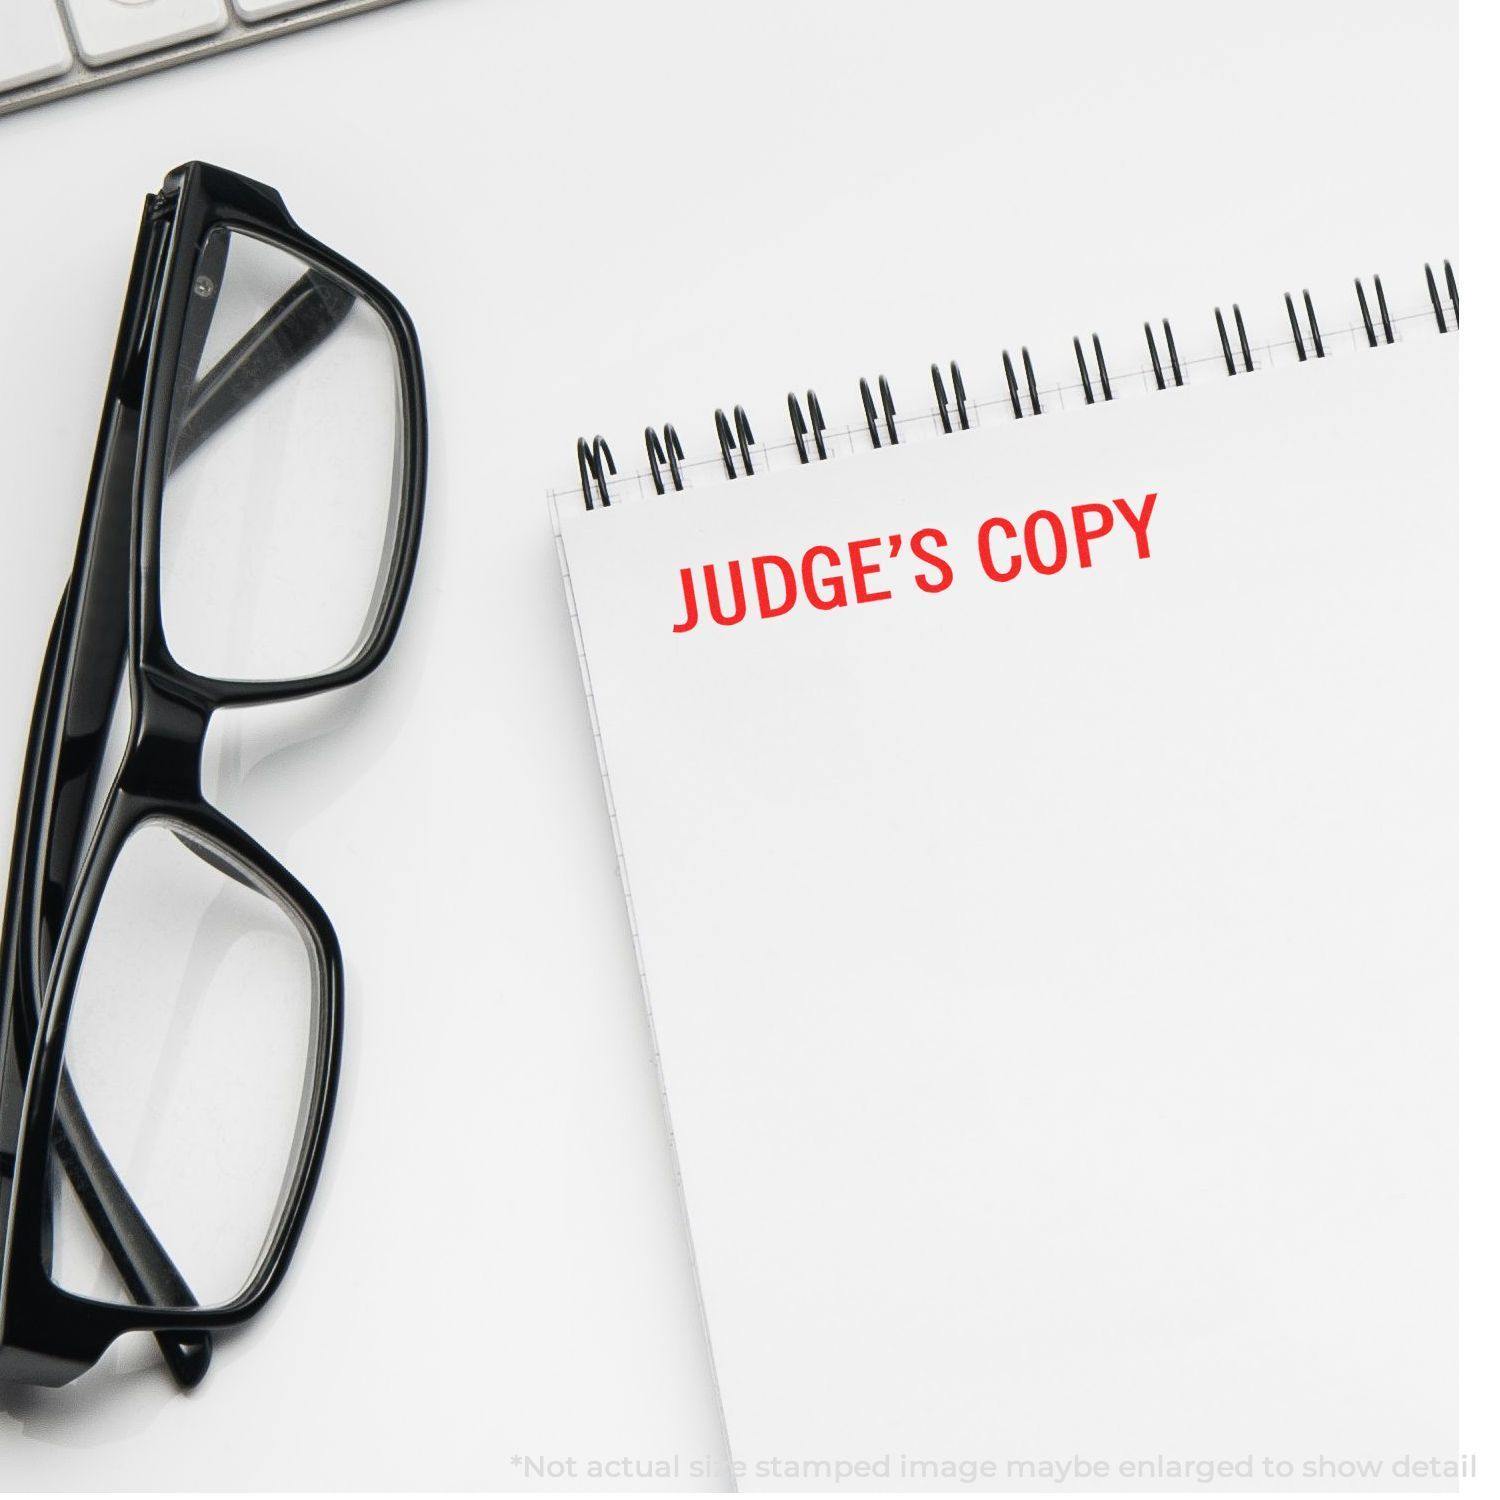 Large Judge's Copy Rubber Stamp Lifestyle Photo